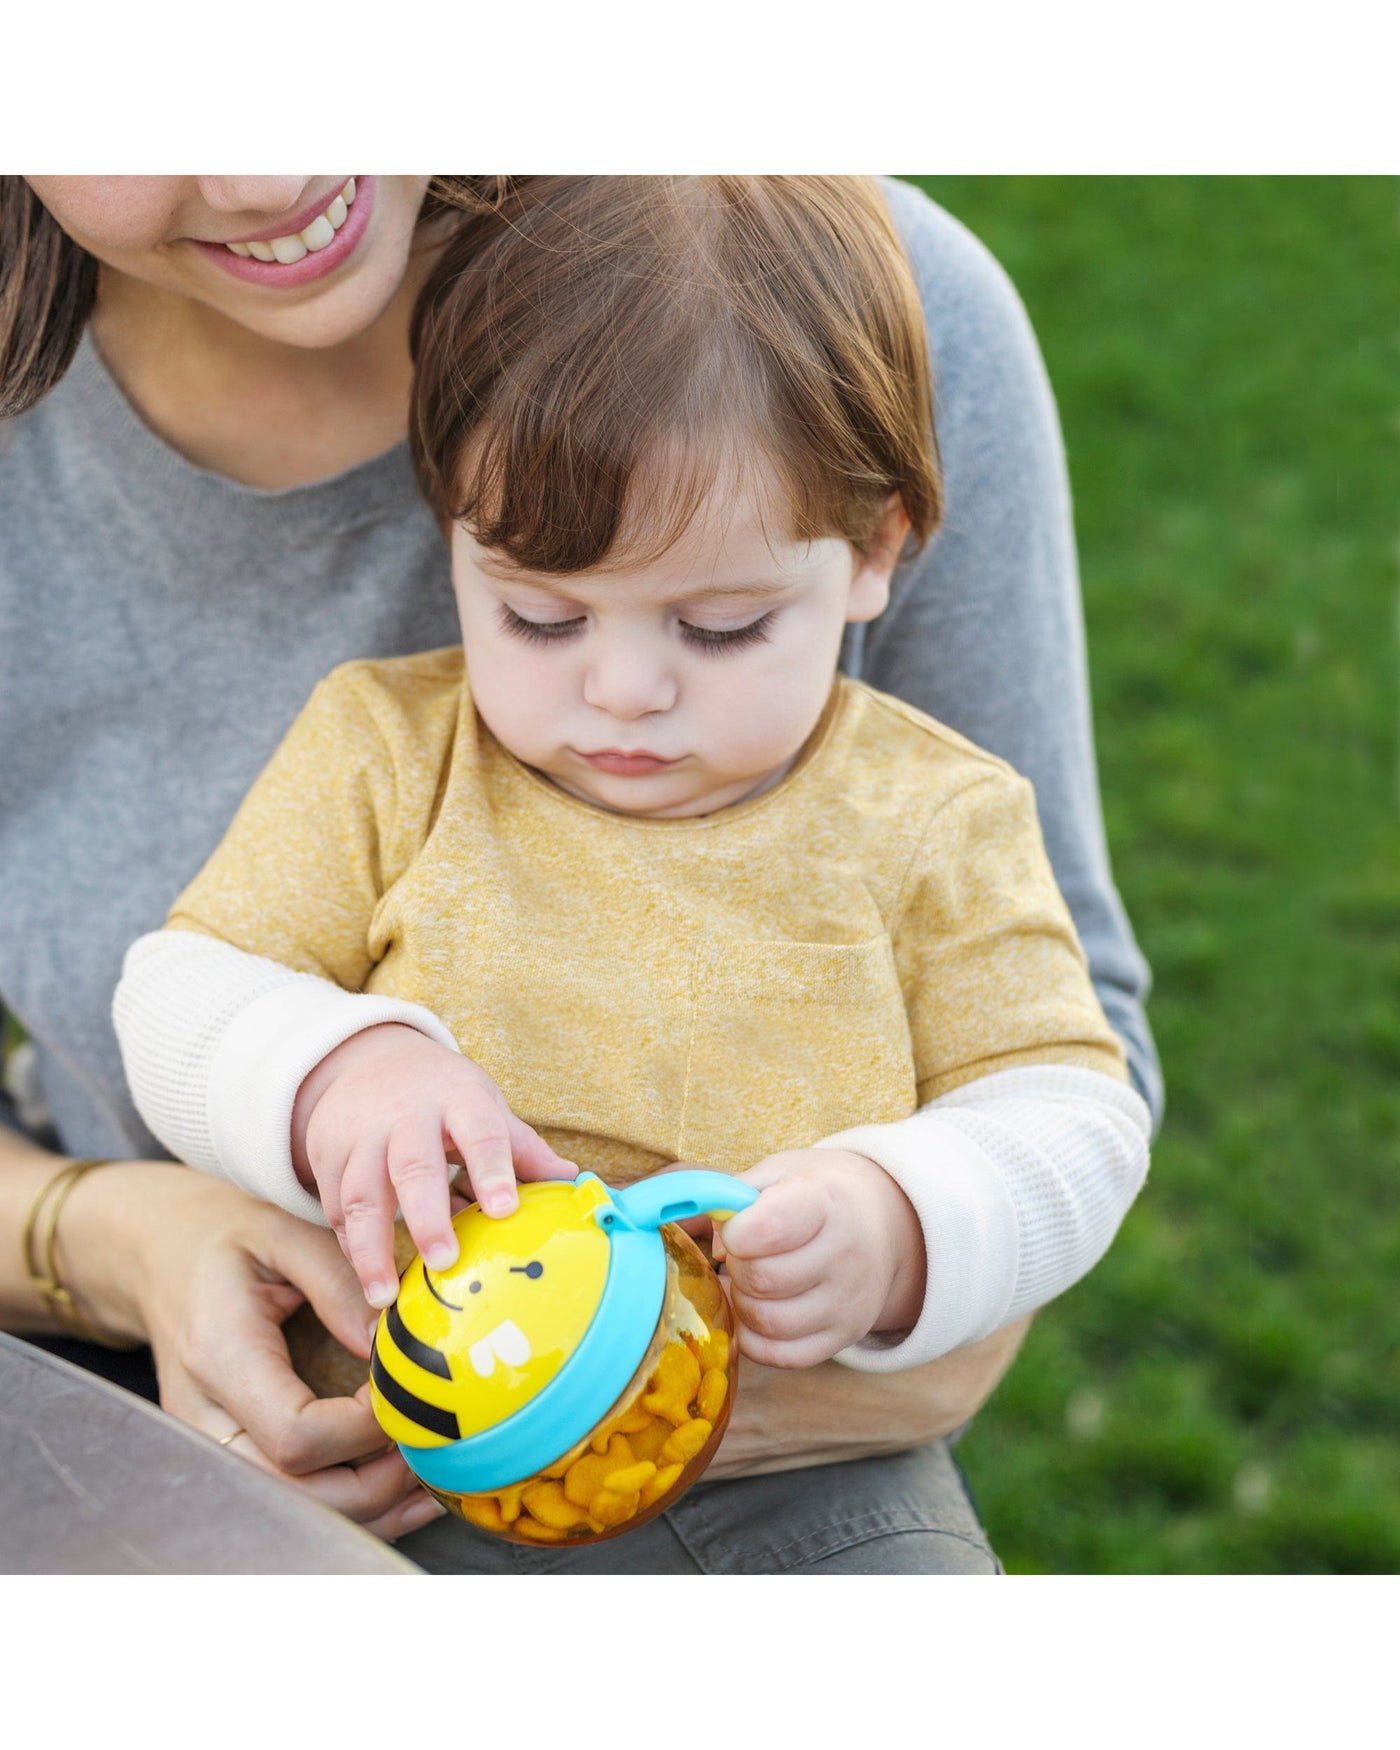 Zoo Snack Cup - Bee | Skip Hop® by Skip Hop, USA Baby Care